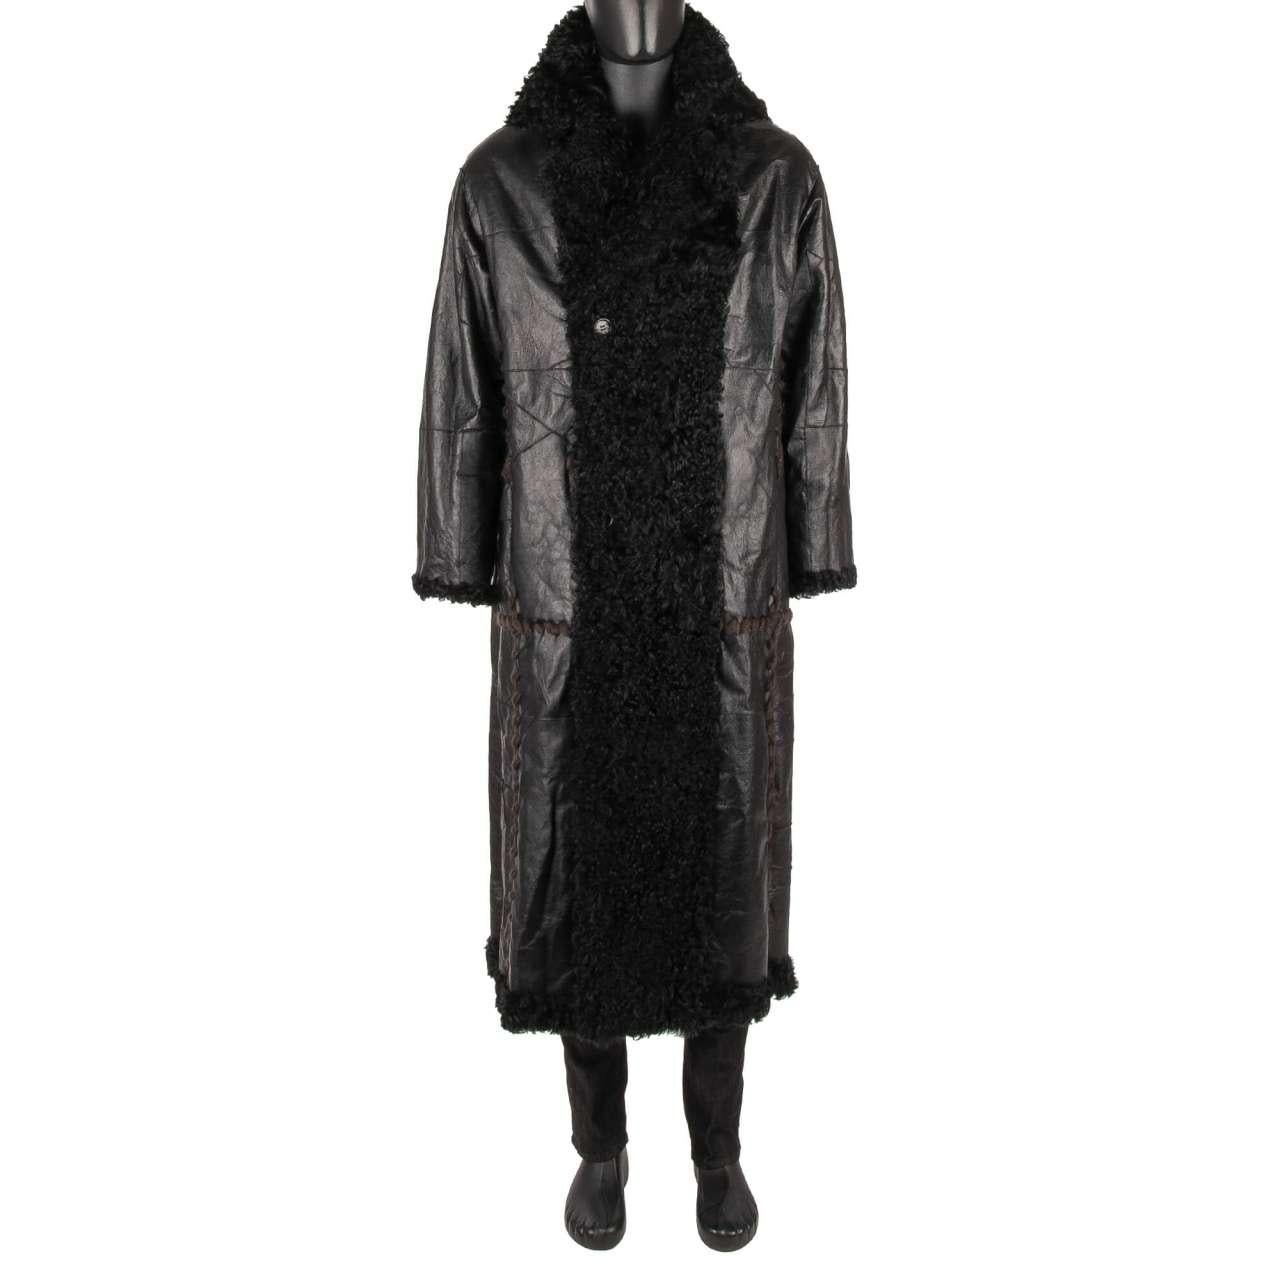 Dolce & Gabbana Double-Breasted Oversize Lamb Fur Leather Coat Black 46 In Excellent Condition For Sale In Erkrath, DE